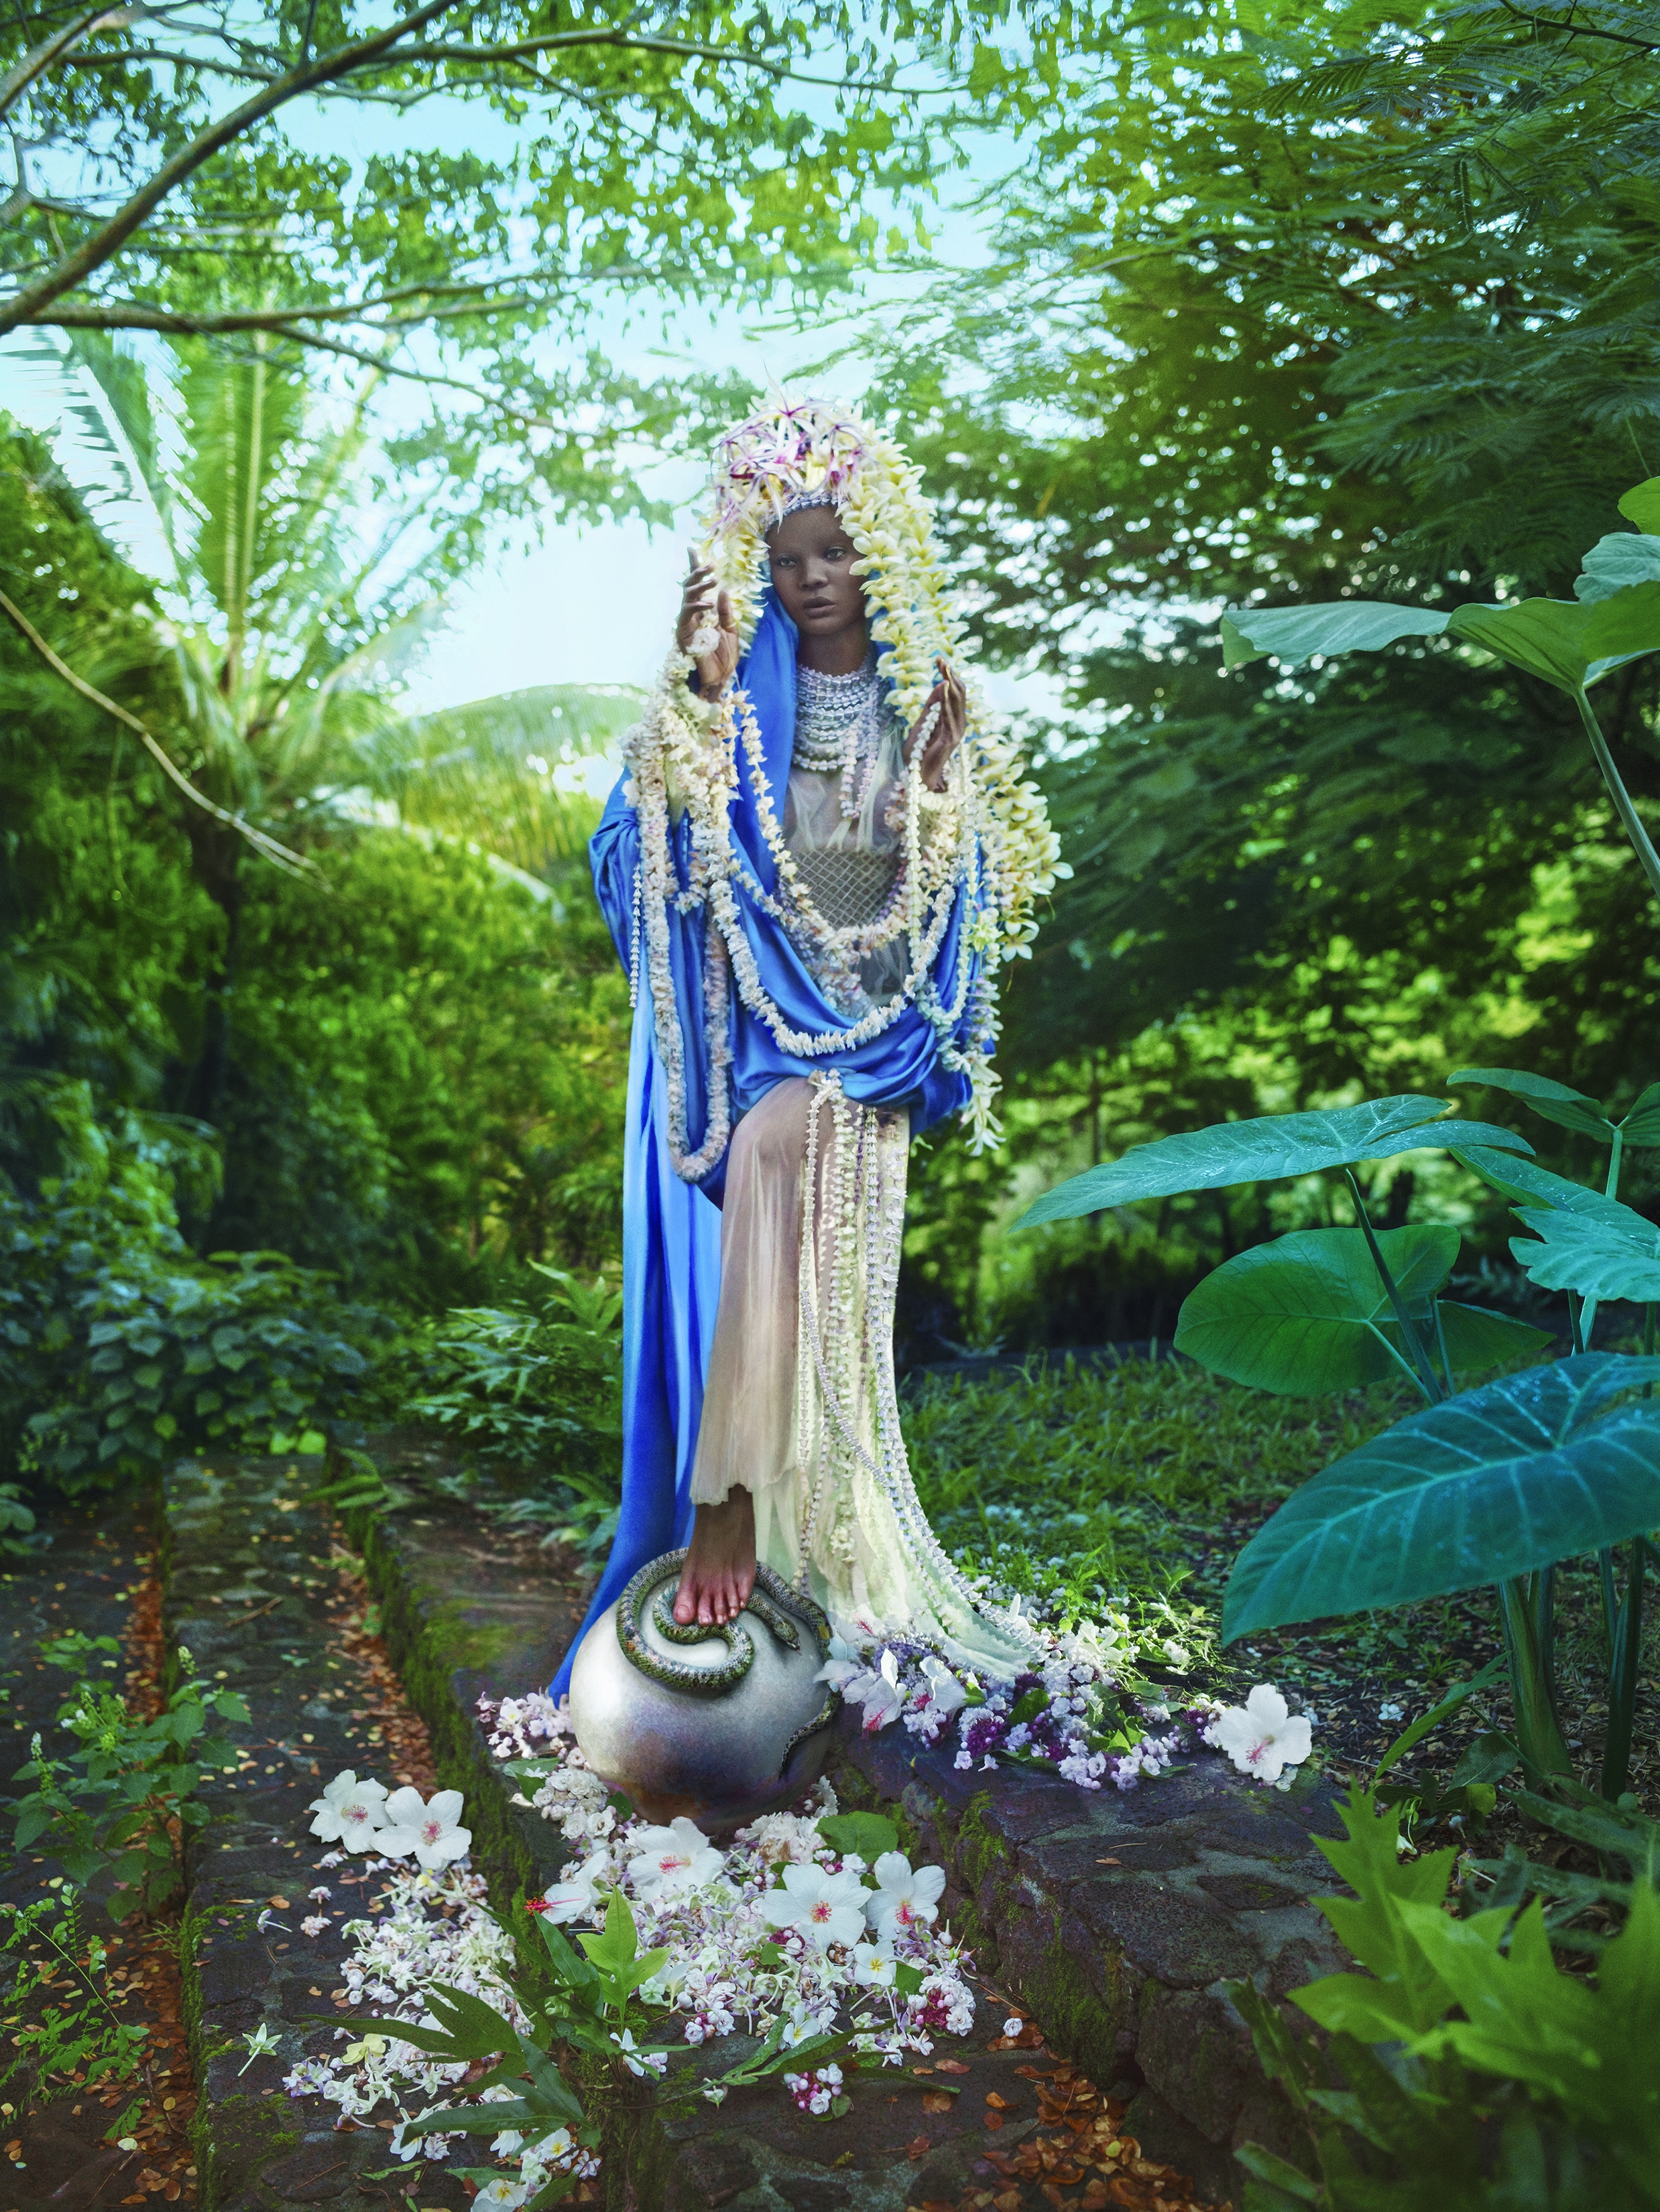 David LaChapelle, Our Lady of the Flowers, Hawaii, 2018 ©David LaChapelle